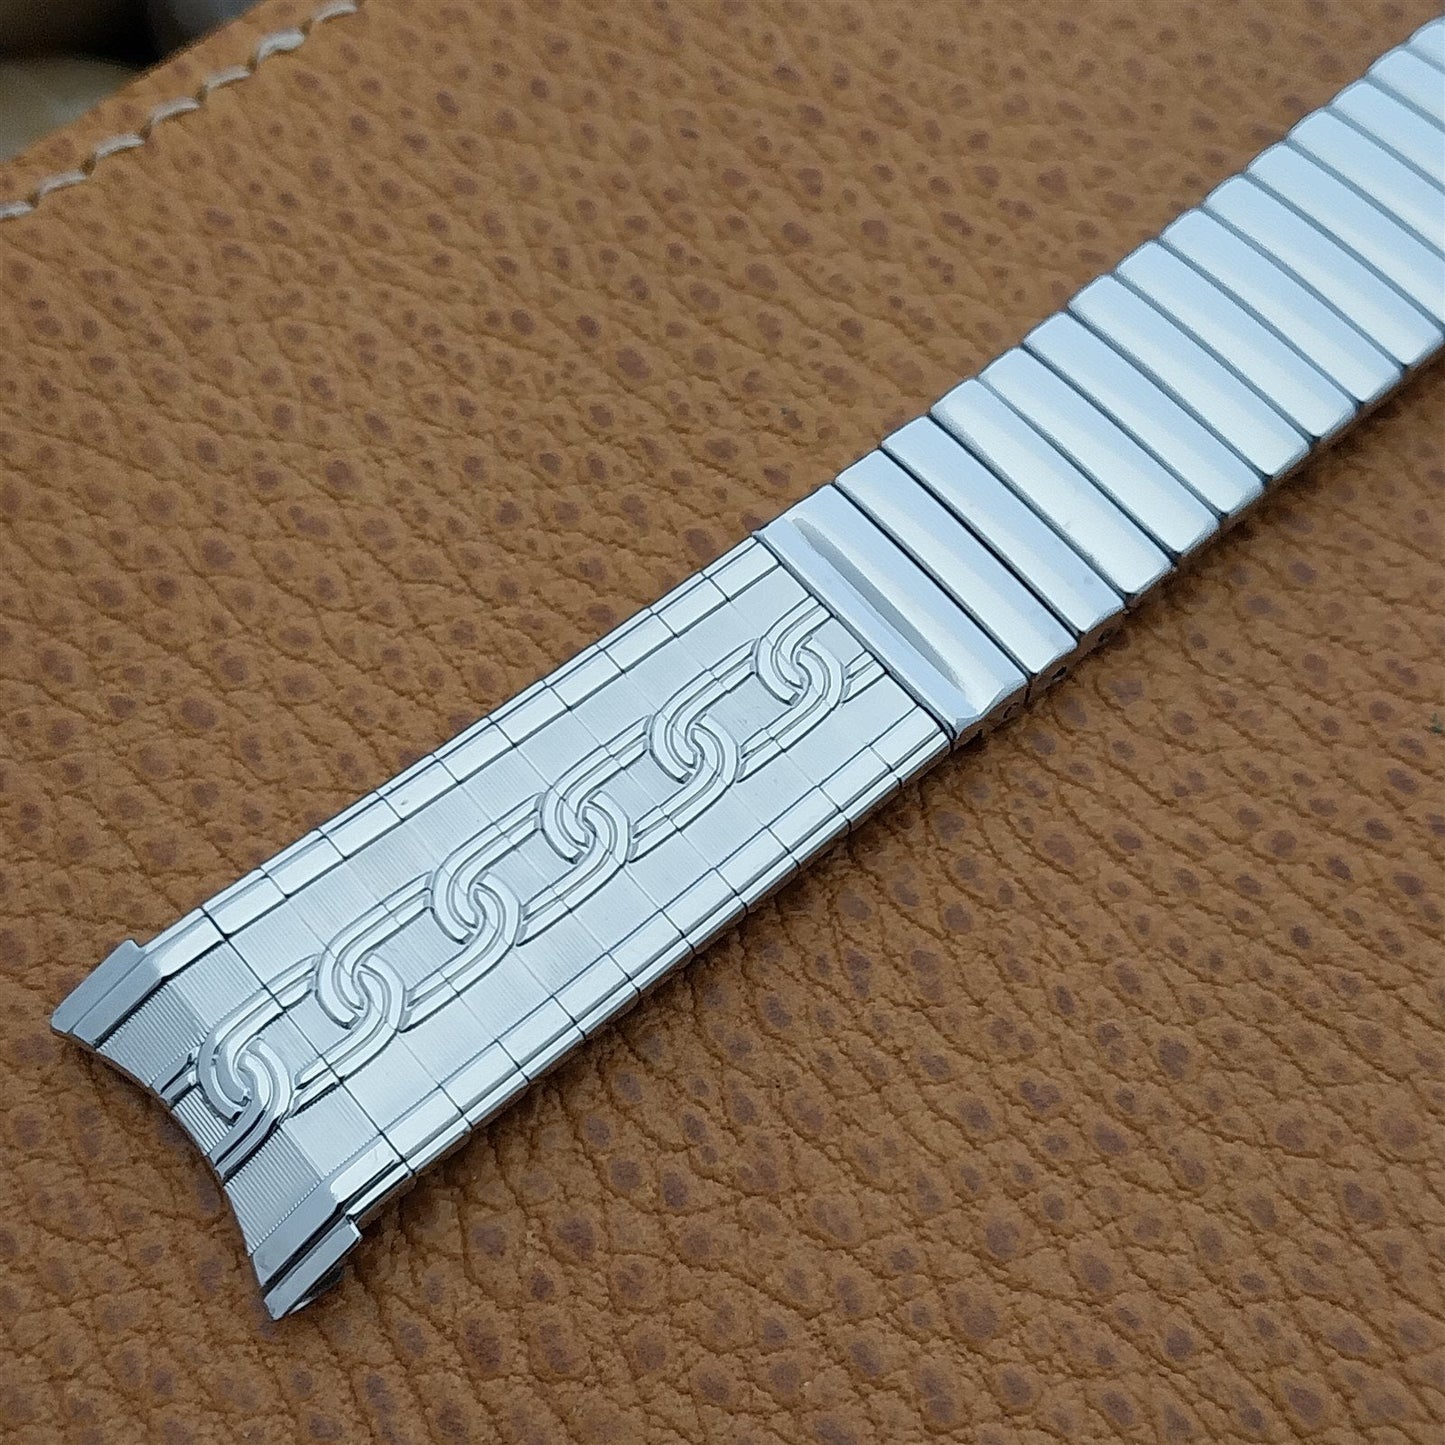 19mm 18mm 17mm JB Champion Stainless Steel Expansion 1960s Vintage Watch Band